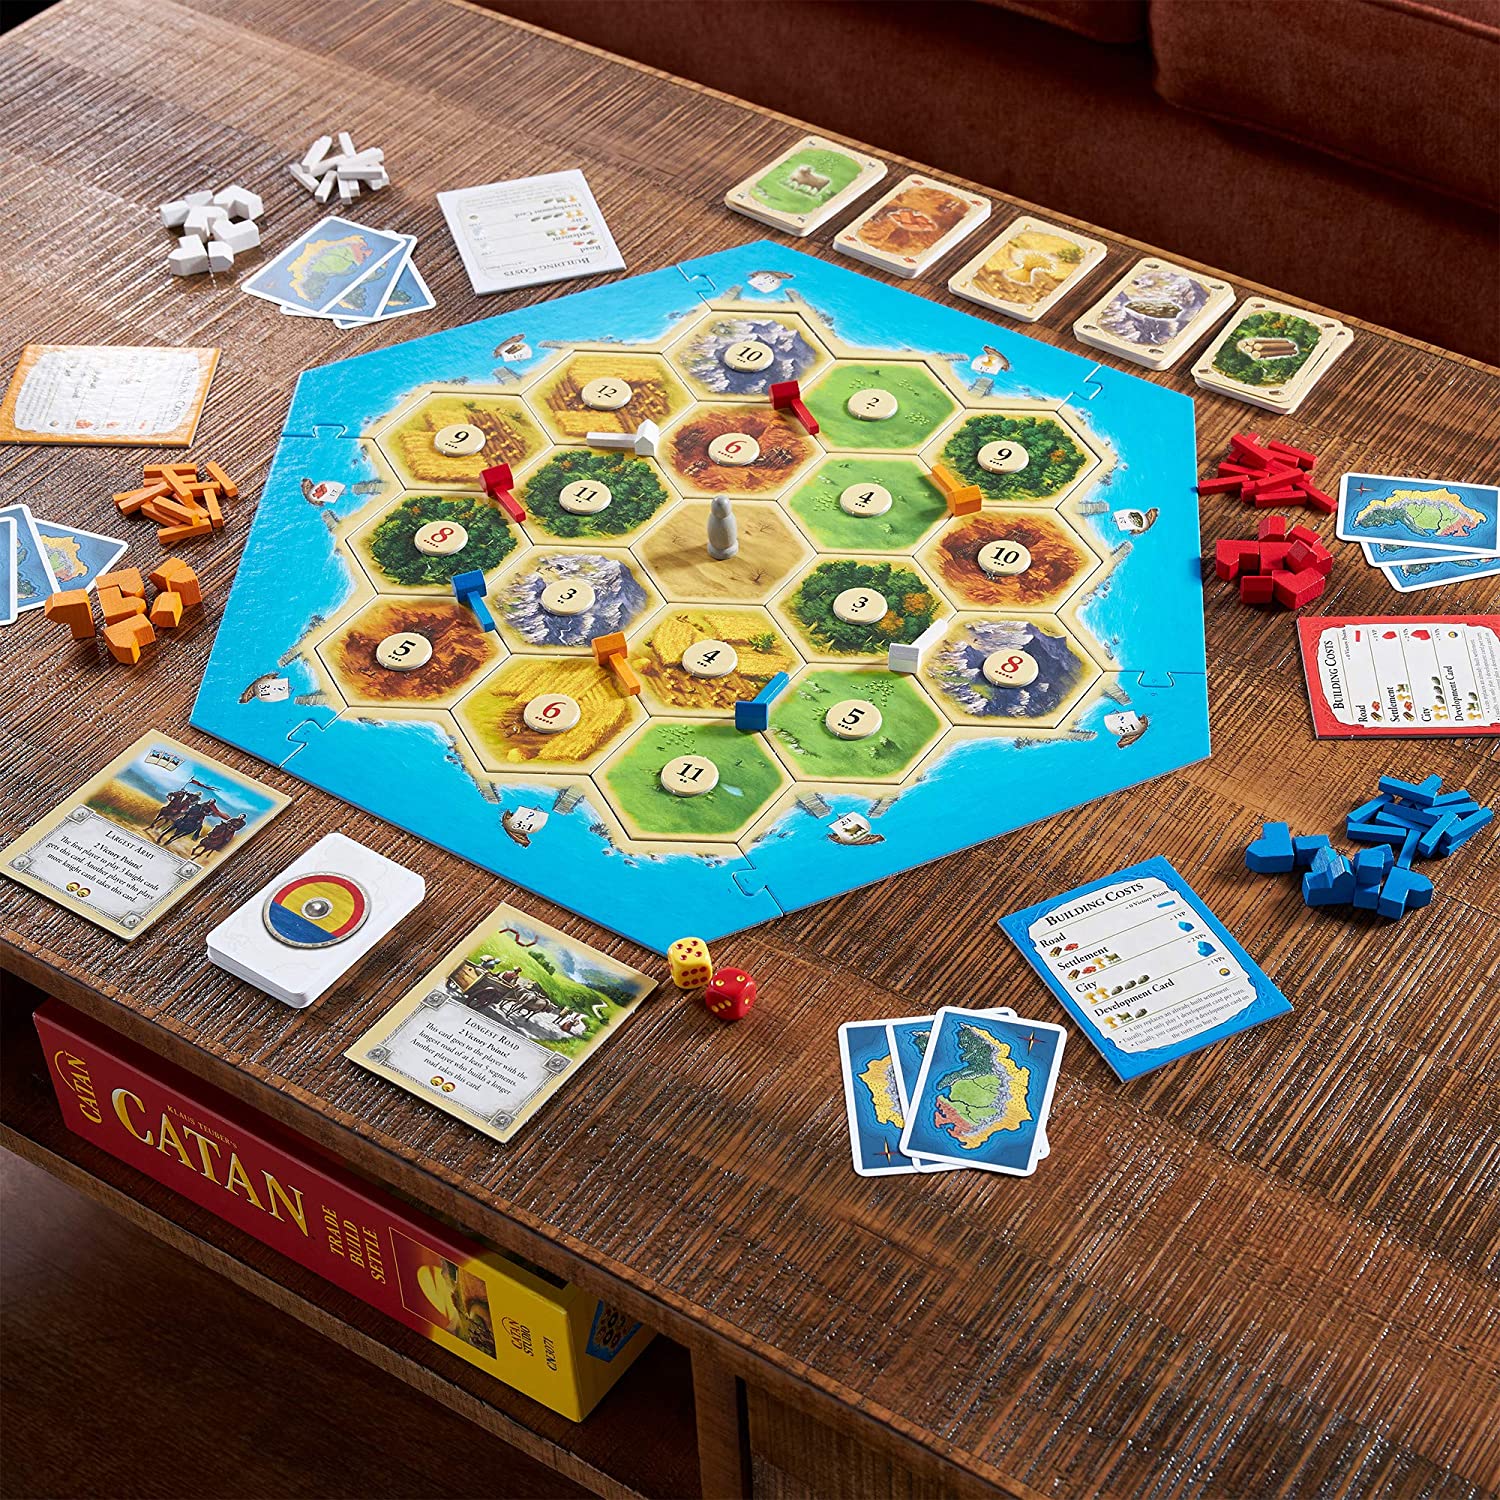 Catan Trade Build Settle Board Game MFG3071 for sale online 